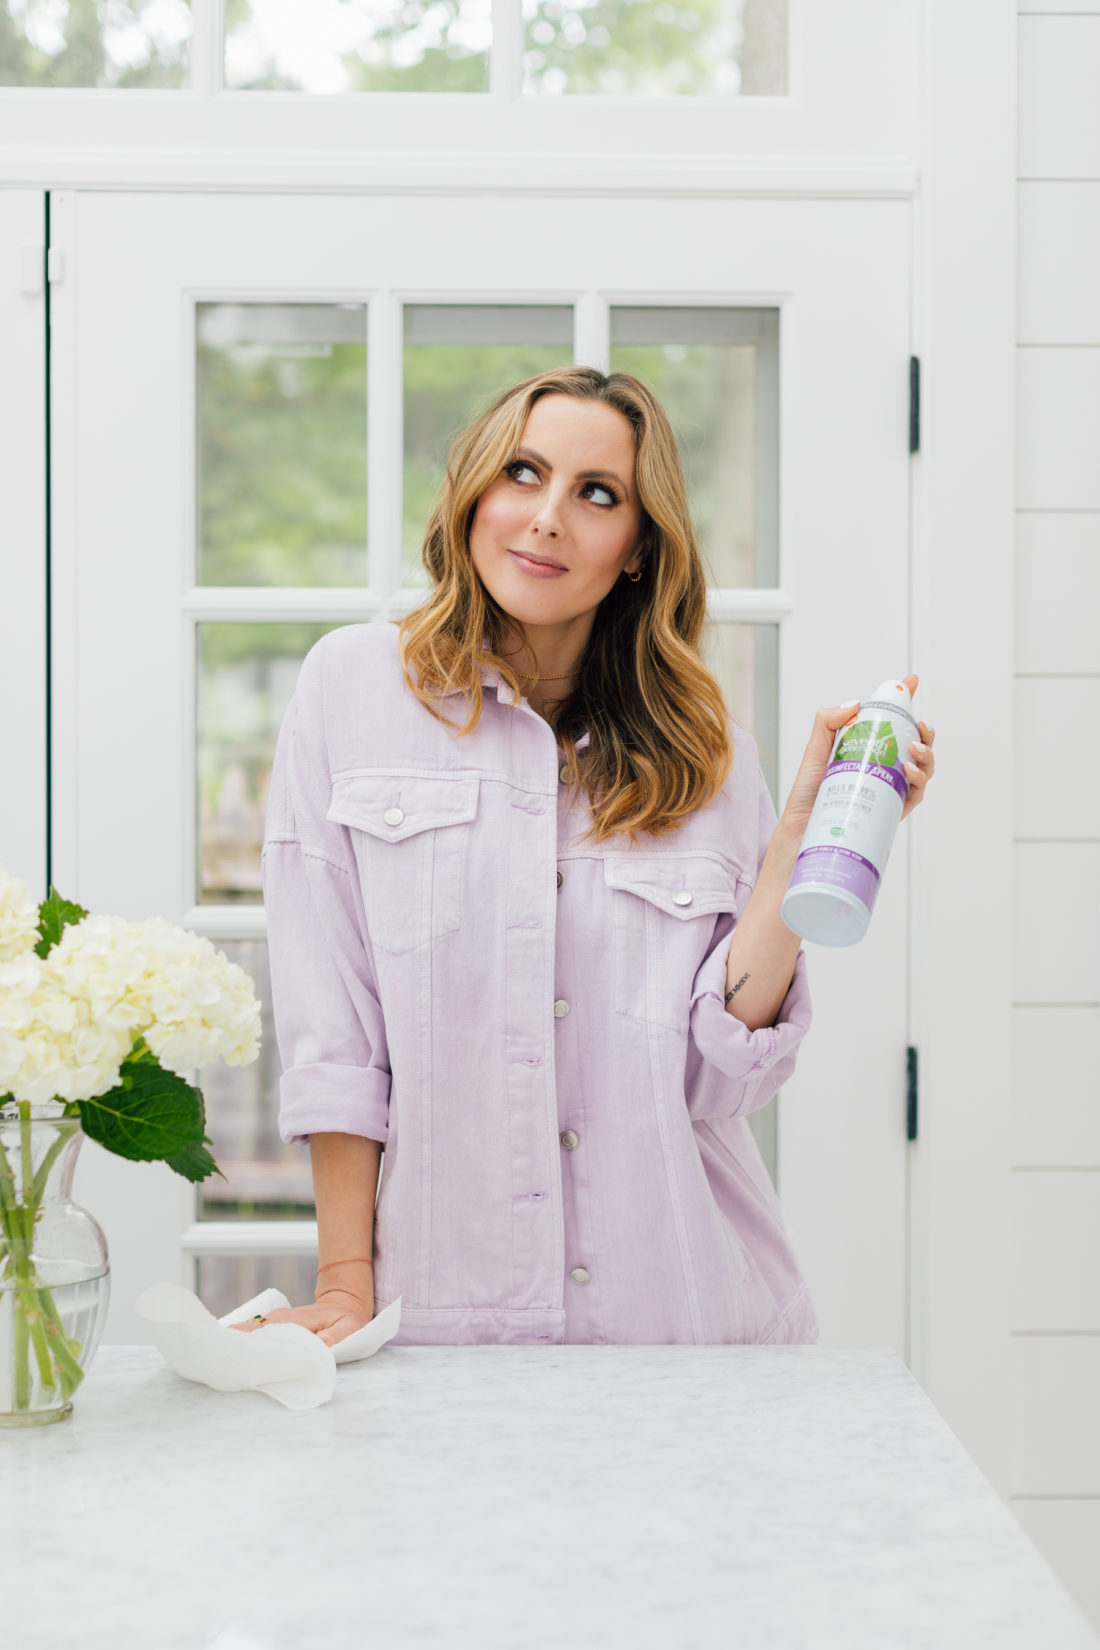 Eva Amurri Martino shares her September 2019 Obsessions which includes this Seventh Generation Disinfectant Spray